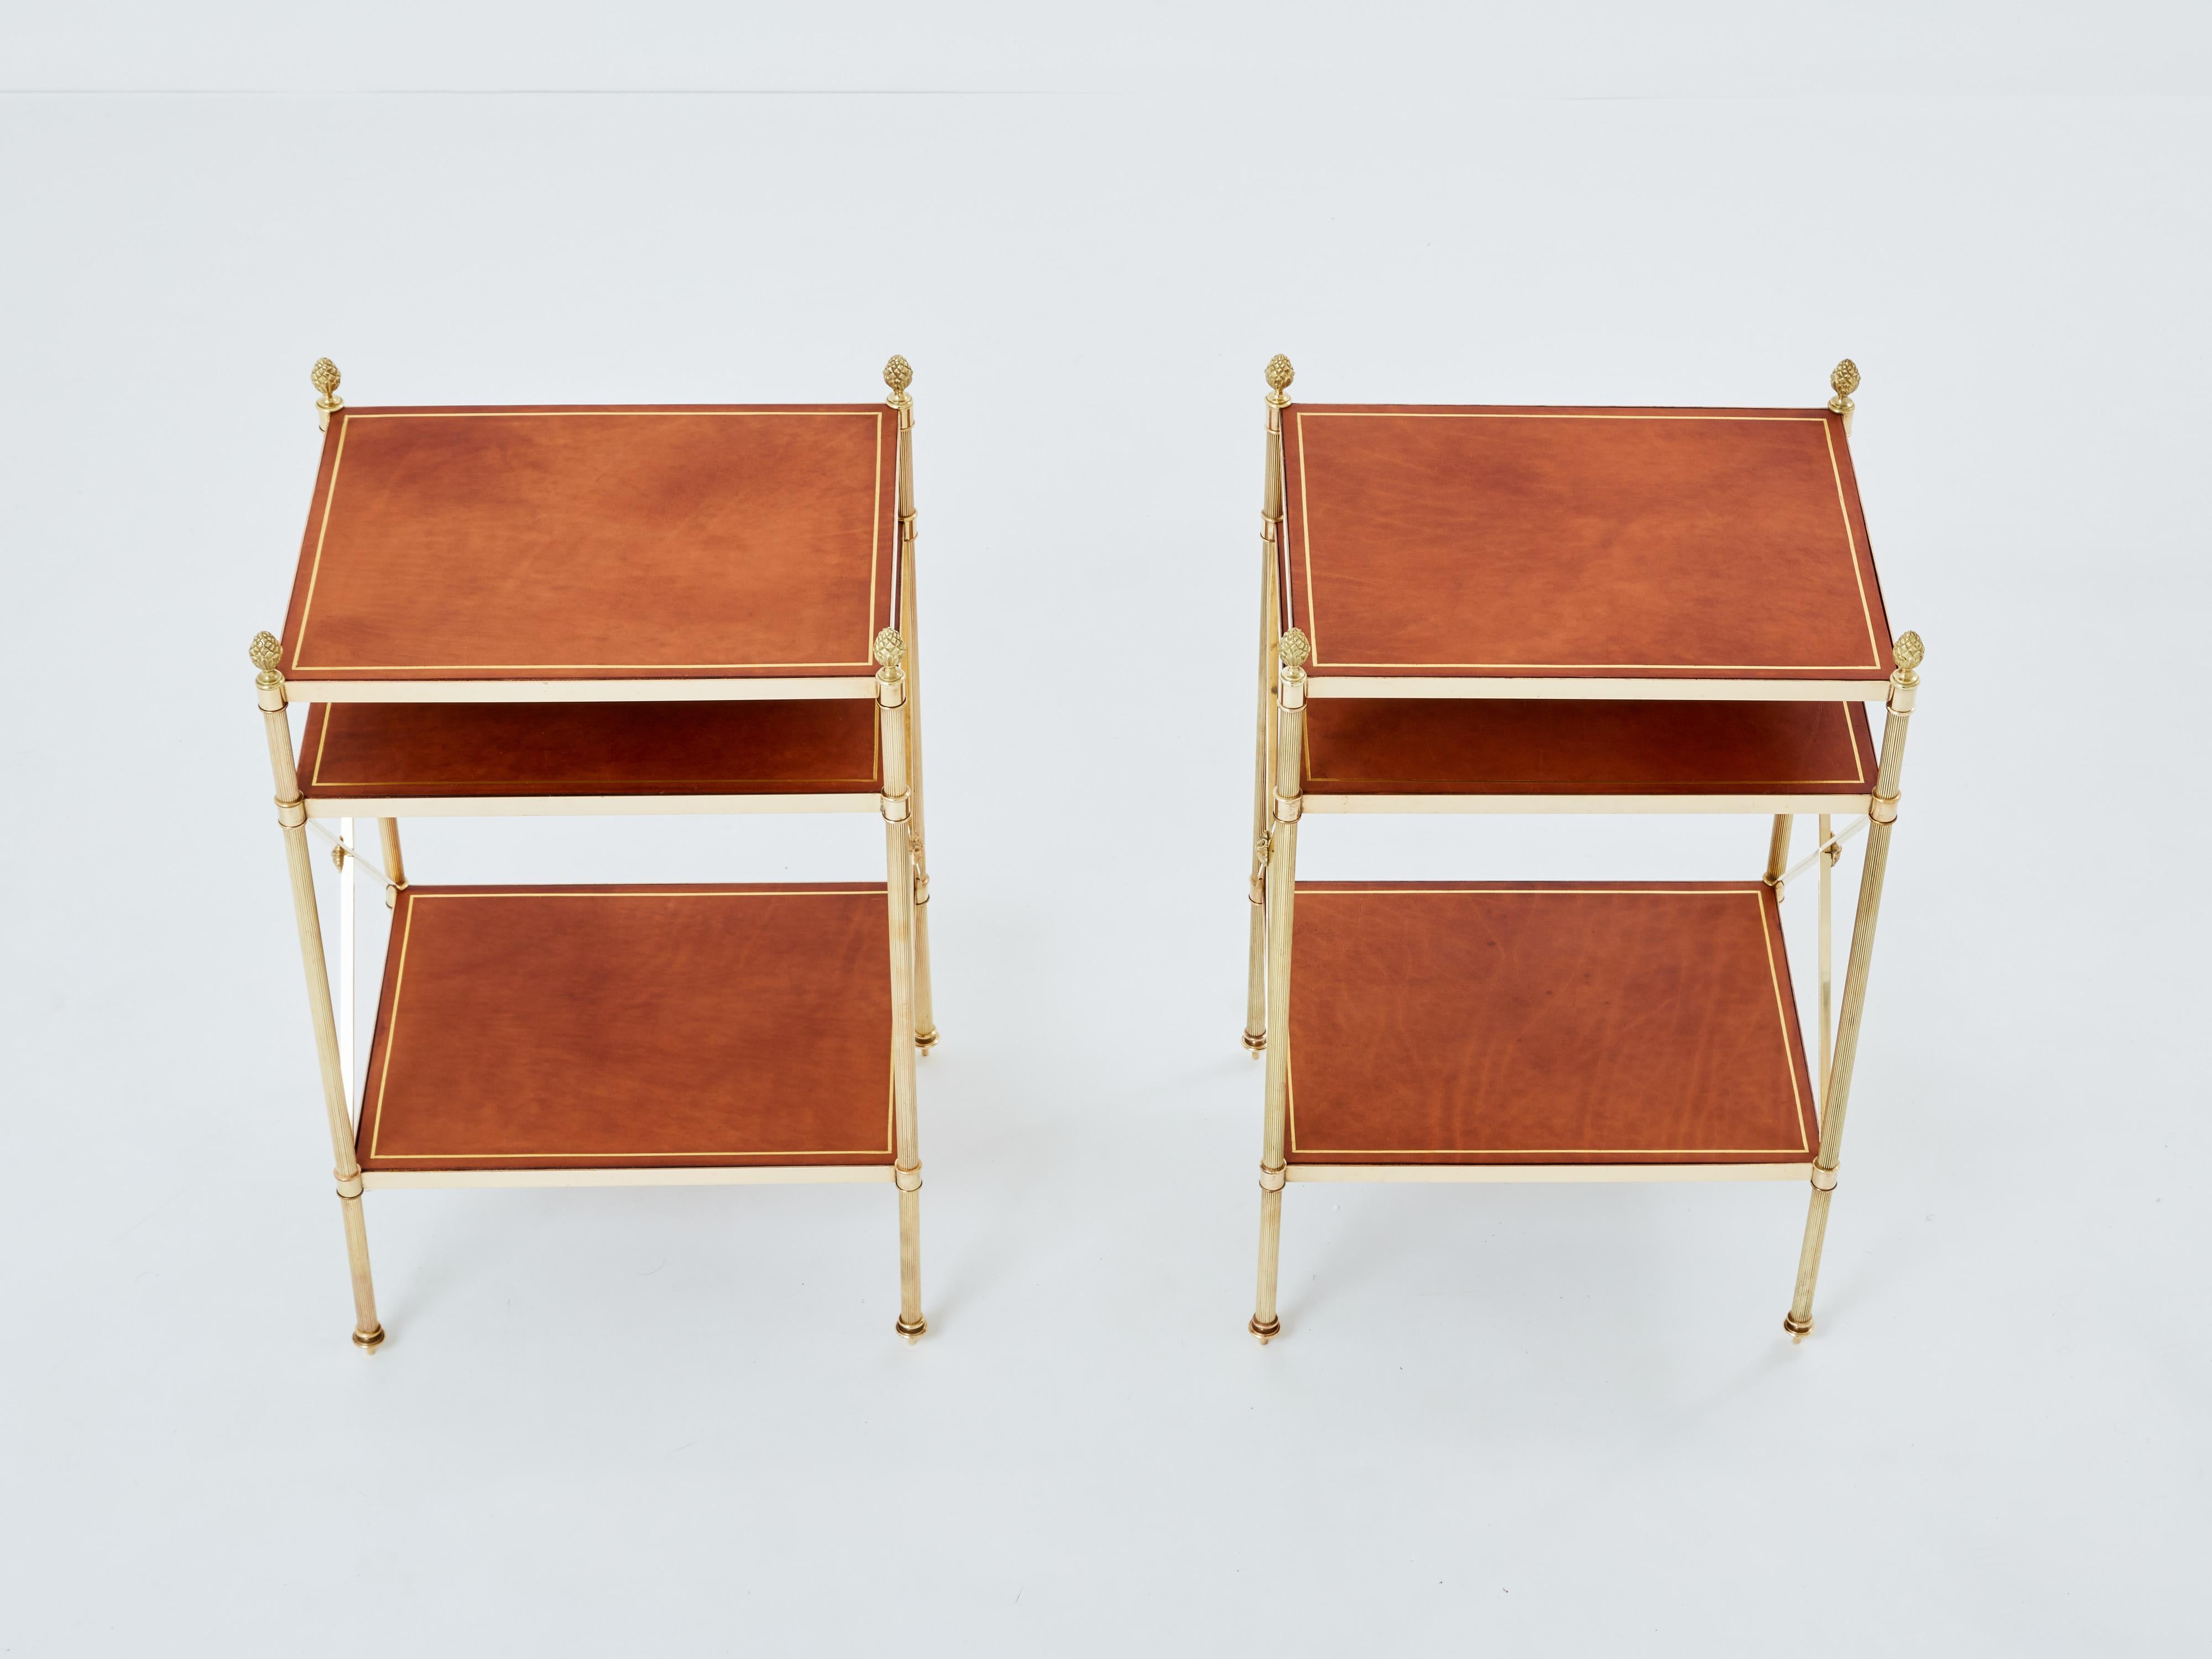 This beautiful pair of three-tier side tables by Maison Jansen was produced with solid brass and brown leather top in the early 1970s. Its crossed side with brass flowers, brass pine cones, and clean lines are typical of the French neoclassical work